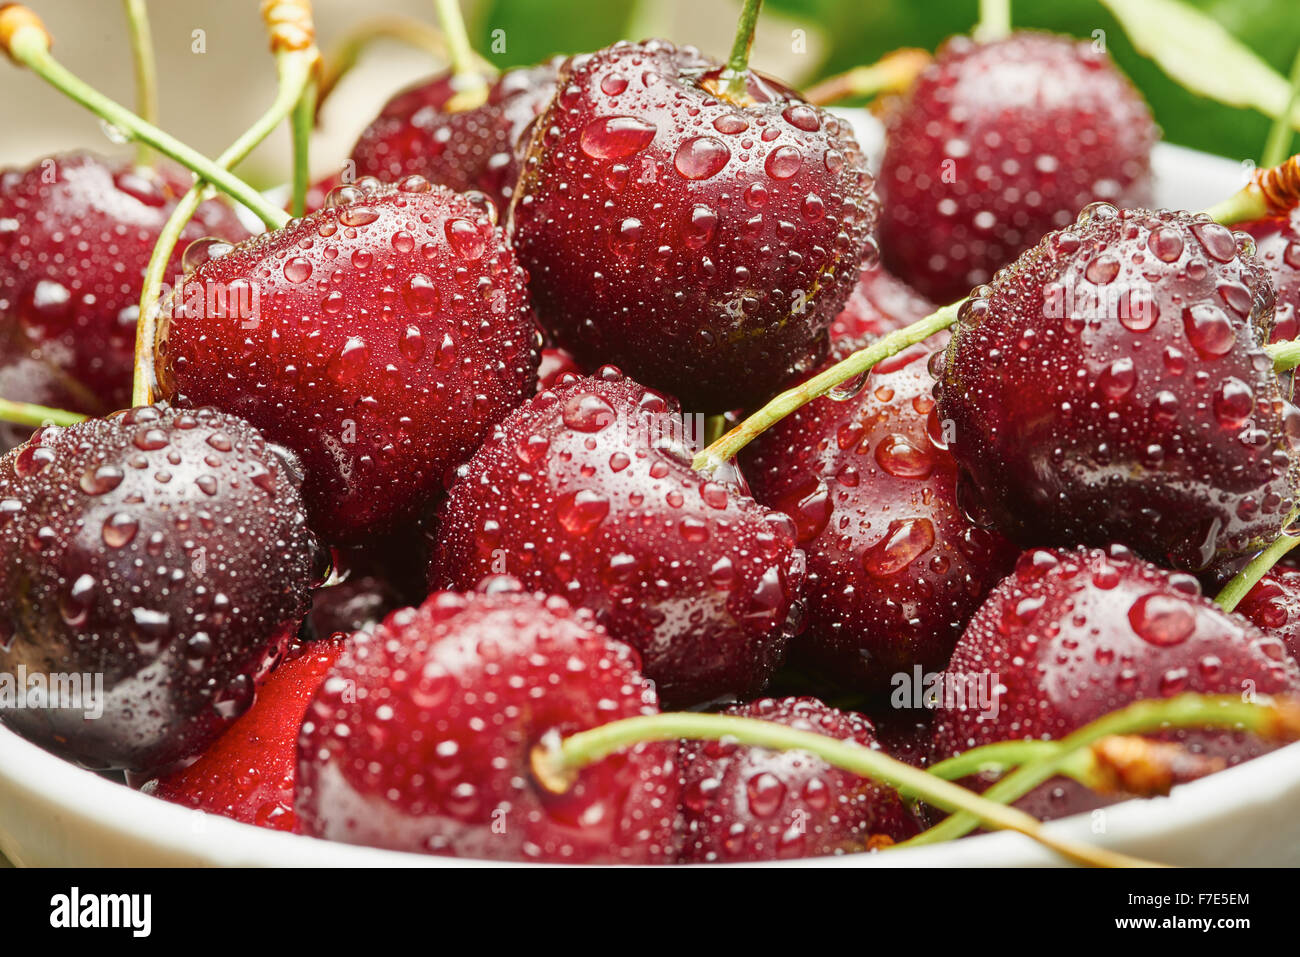 Cherries in white bowl on wooden table in garden Stock Photo